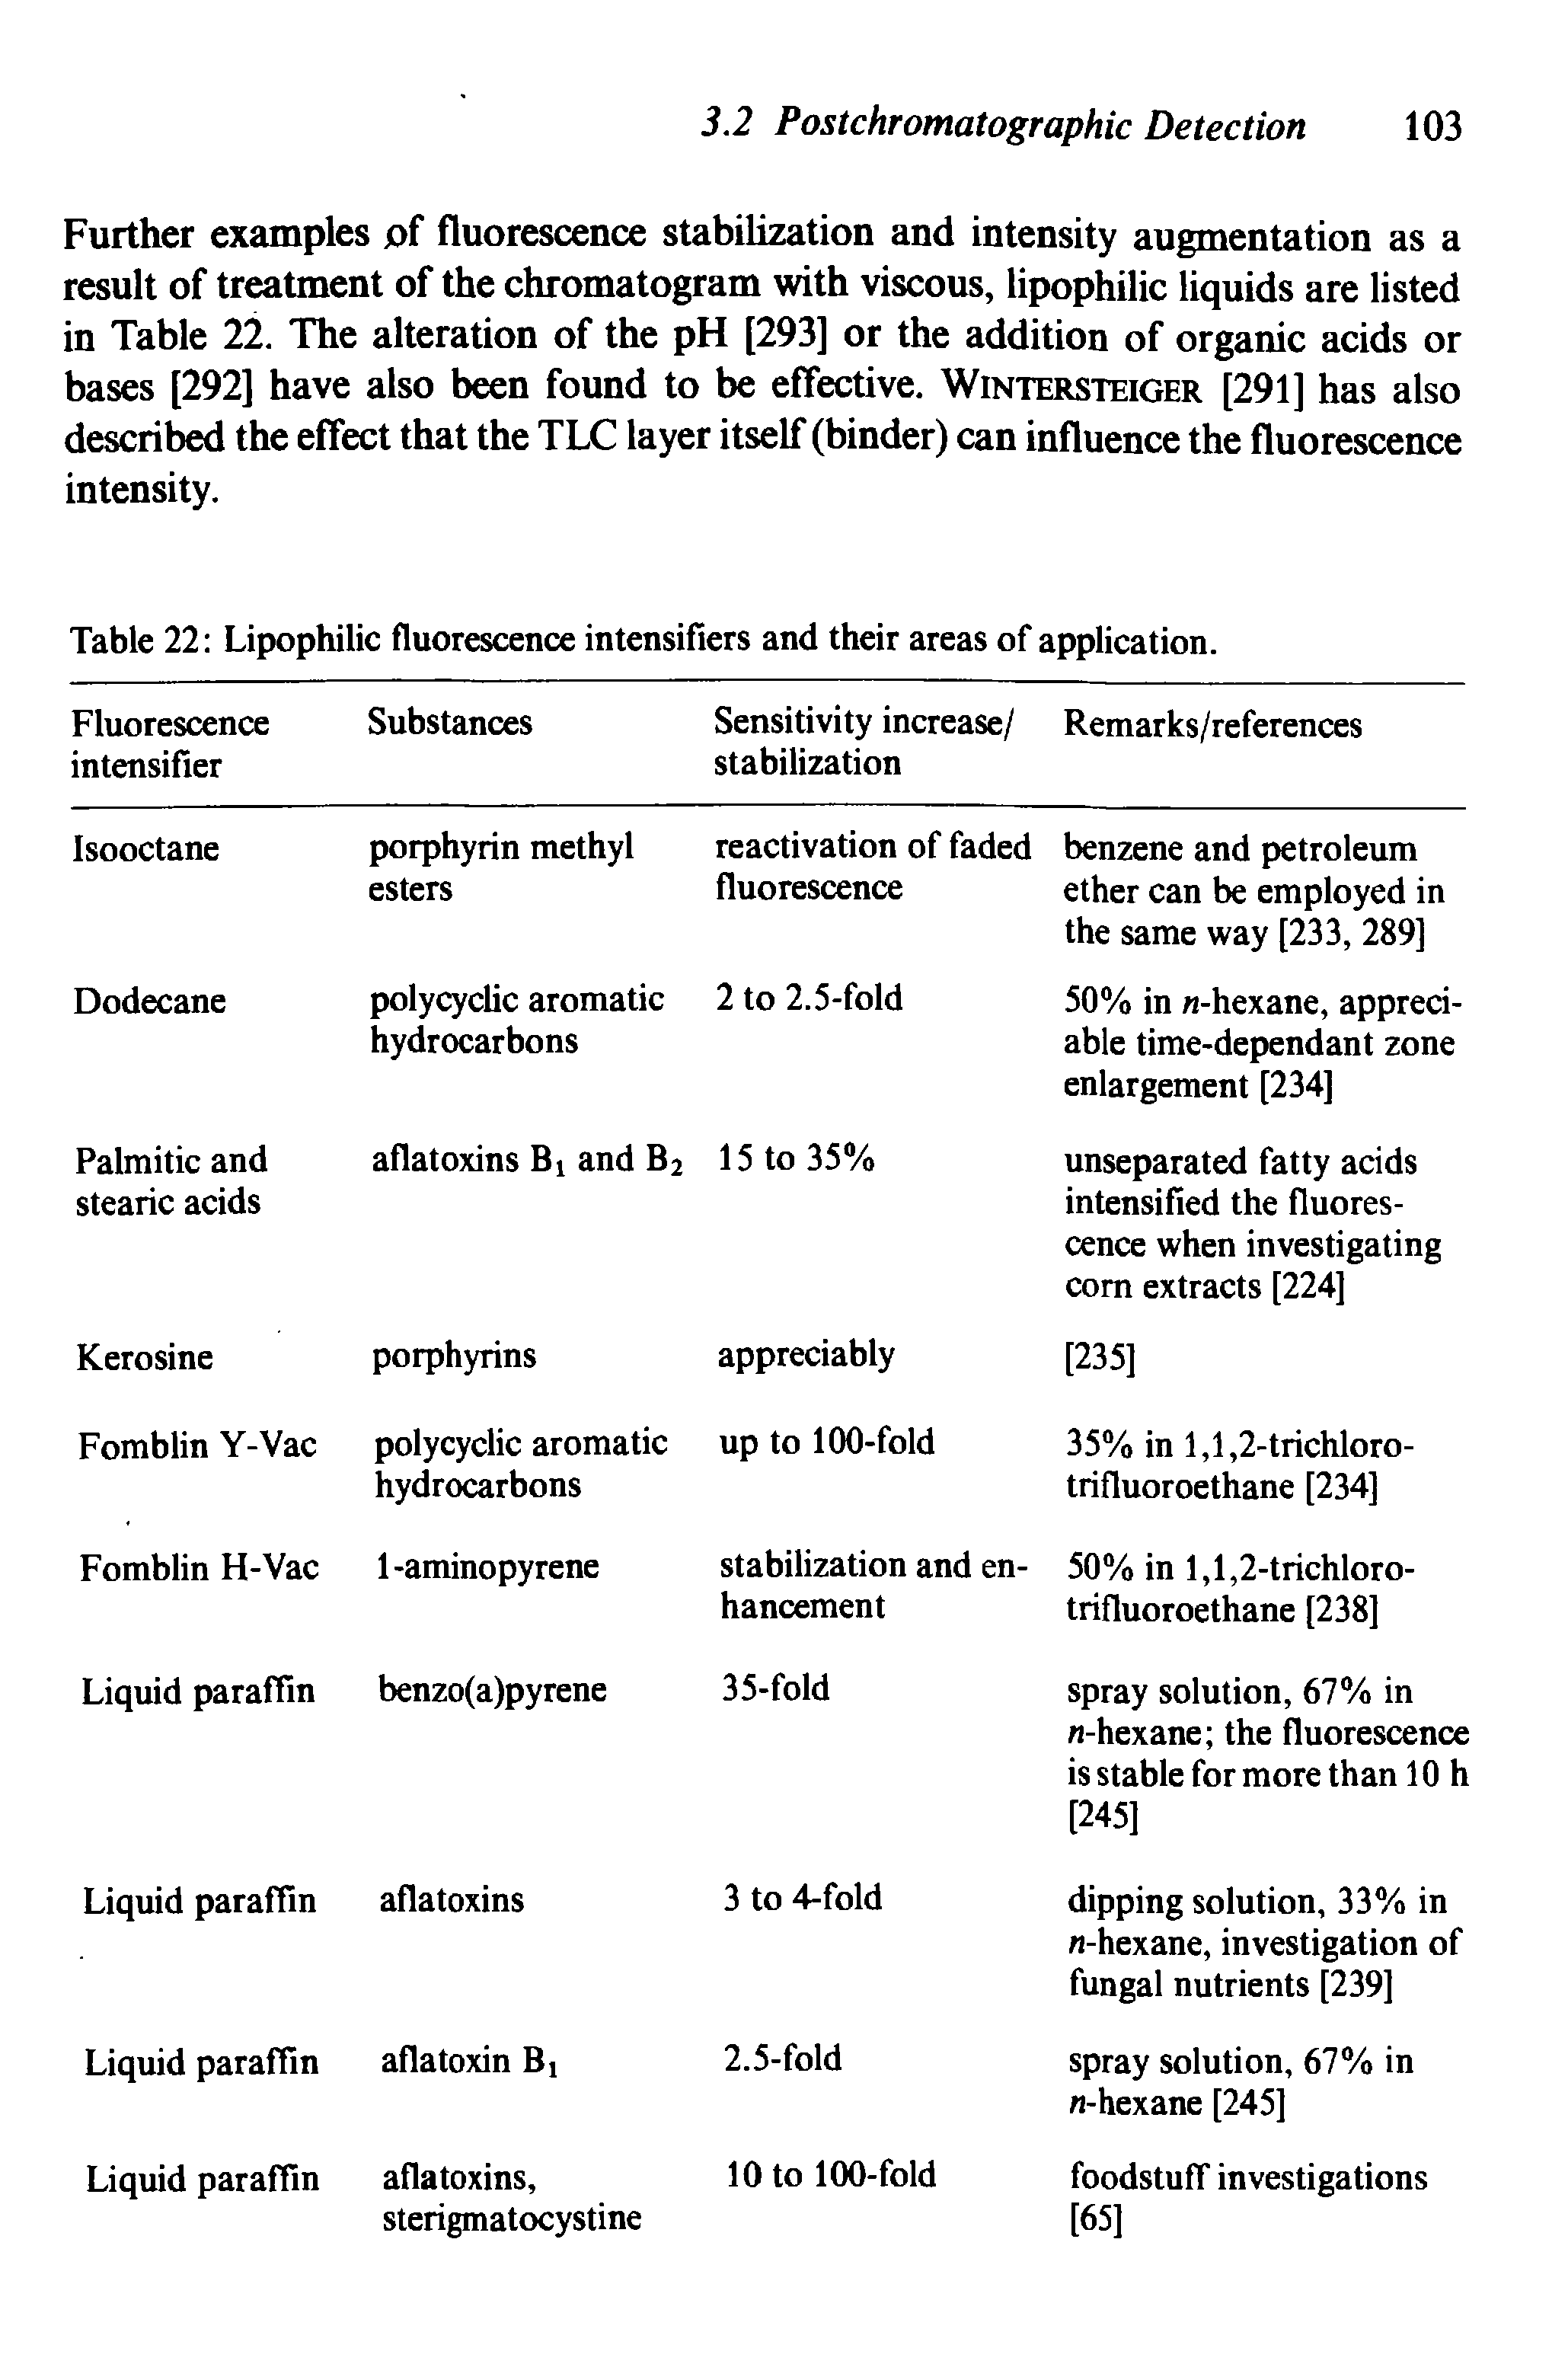 Table 22 Lipophilic fluorescence intensifiers and their areas of application.